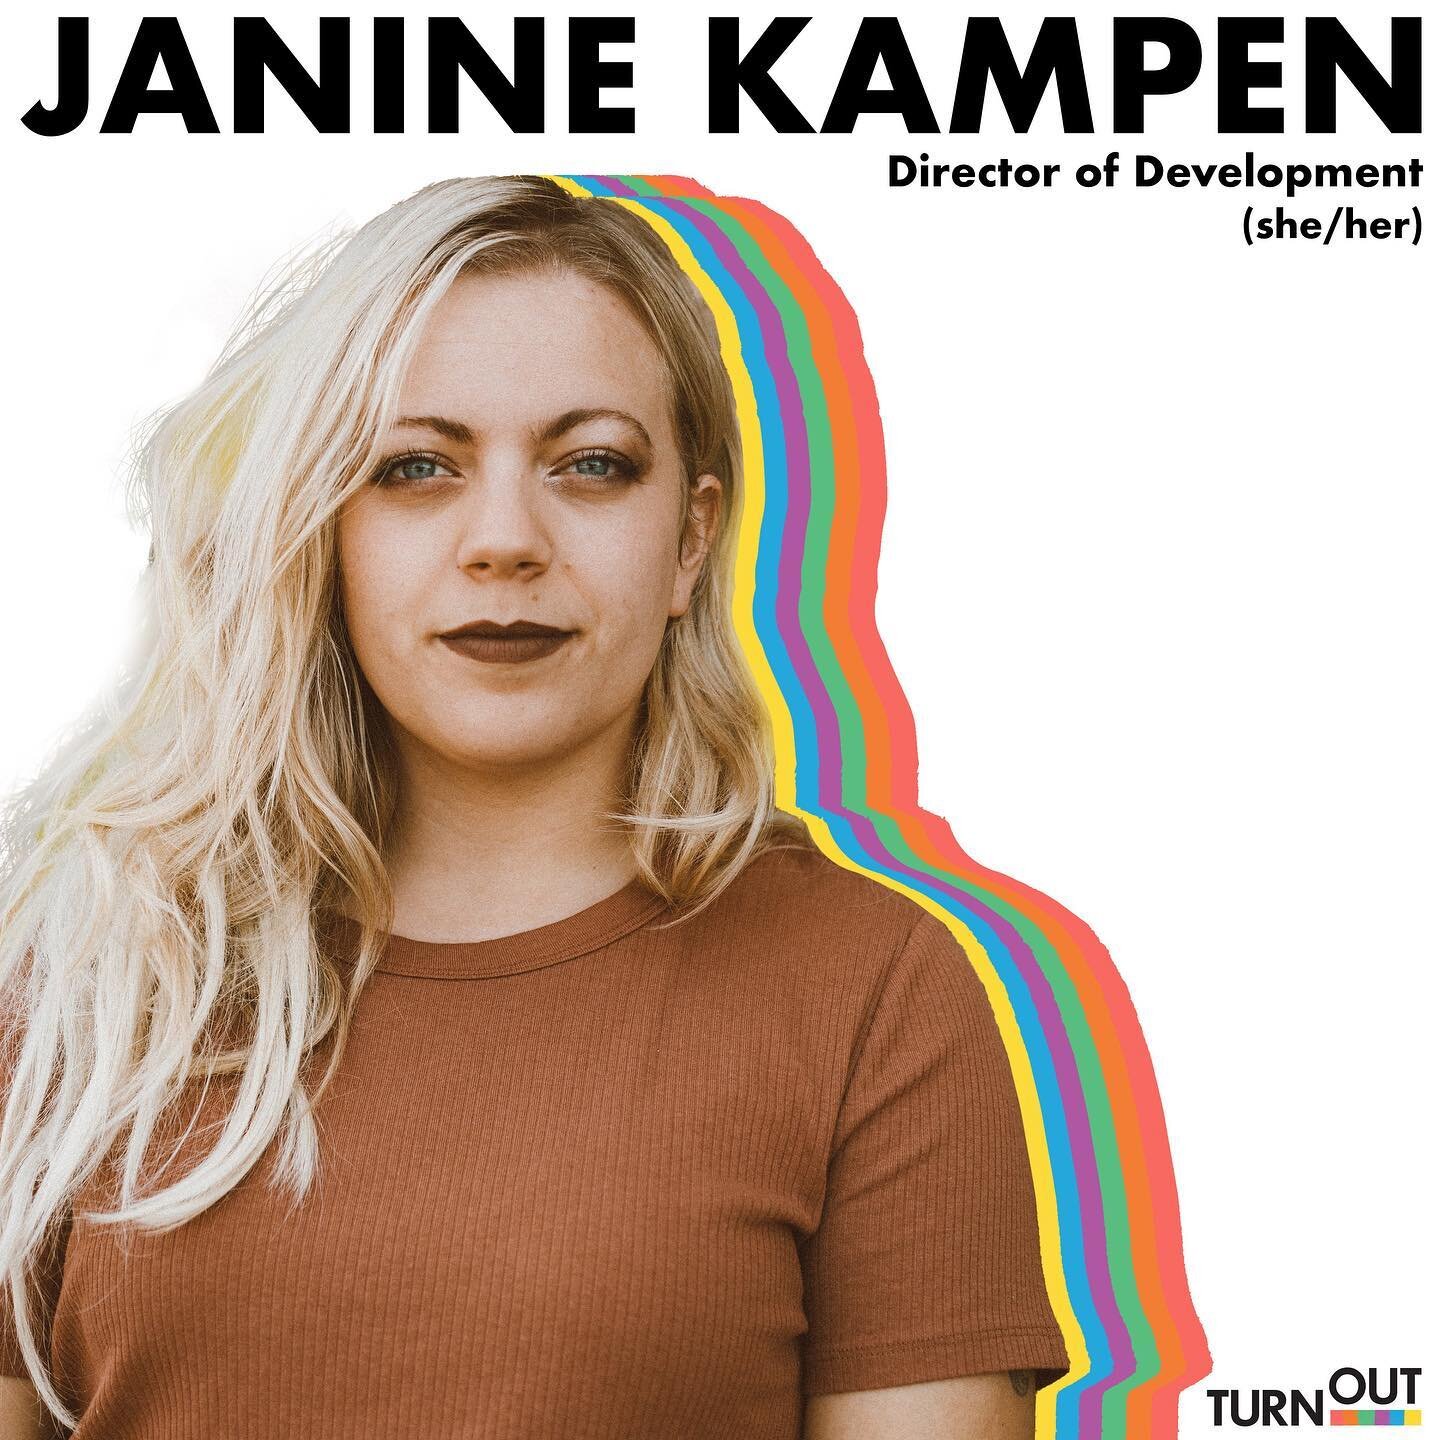 🌻Meet the Team🌻

Janine Kampen (she/her) is our fantastic Director of Development! She joined our amazing team in April and has been crucial for our work of empowering our LGBTQ+ communities!

💥Sun/Moon/Rising Sign?: Aries Sun. I don't know the ti